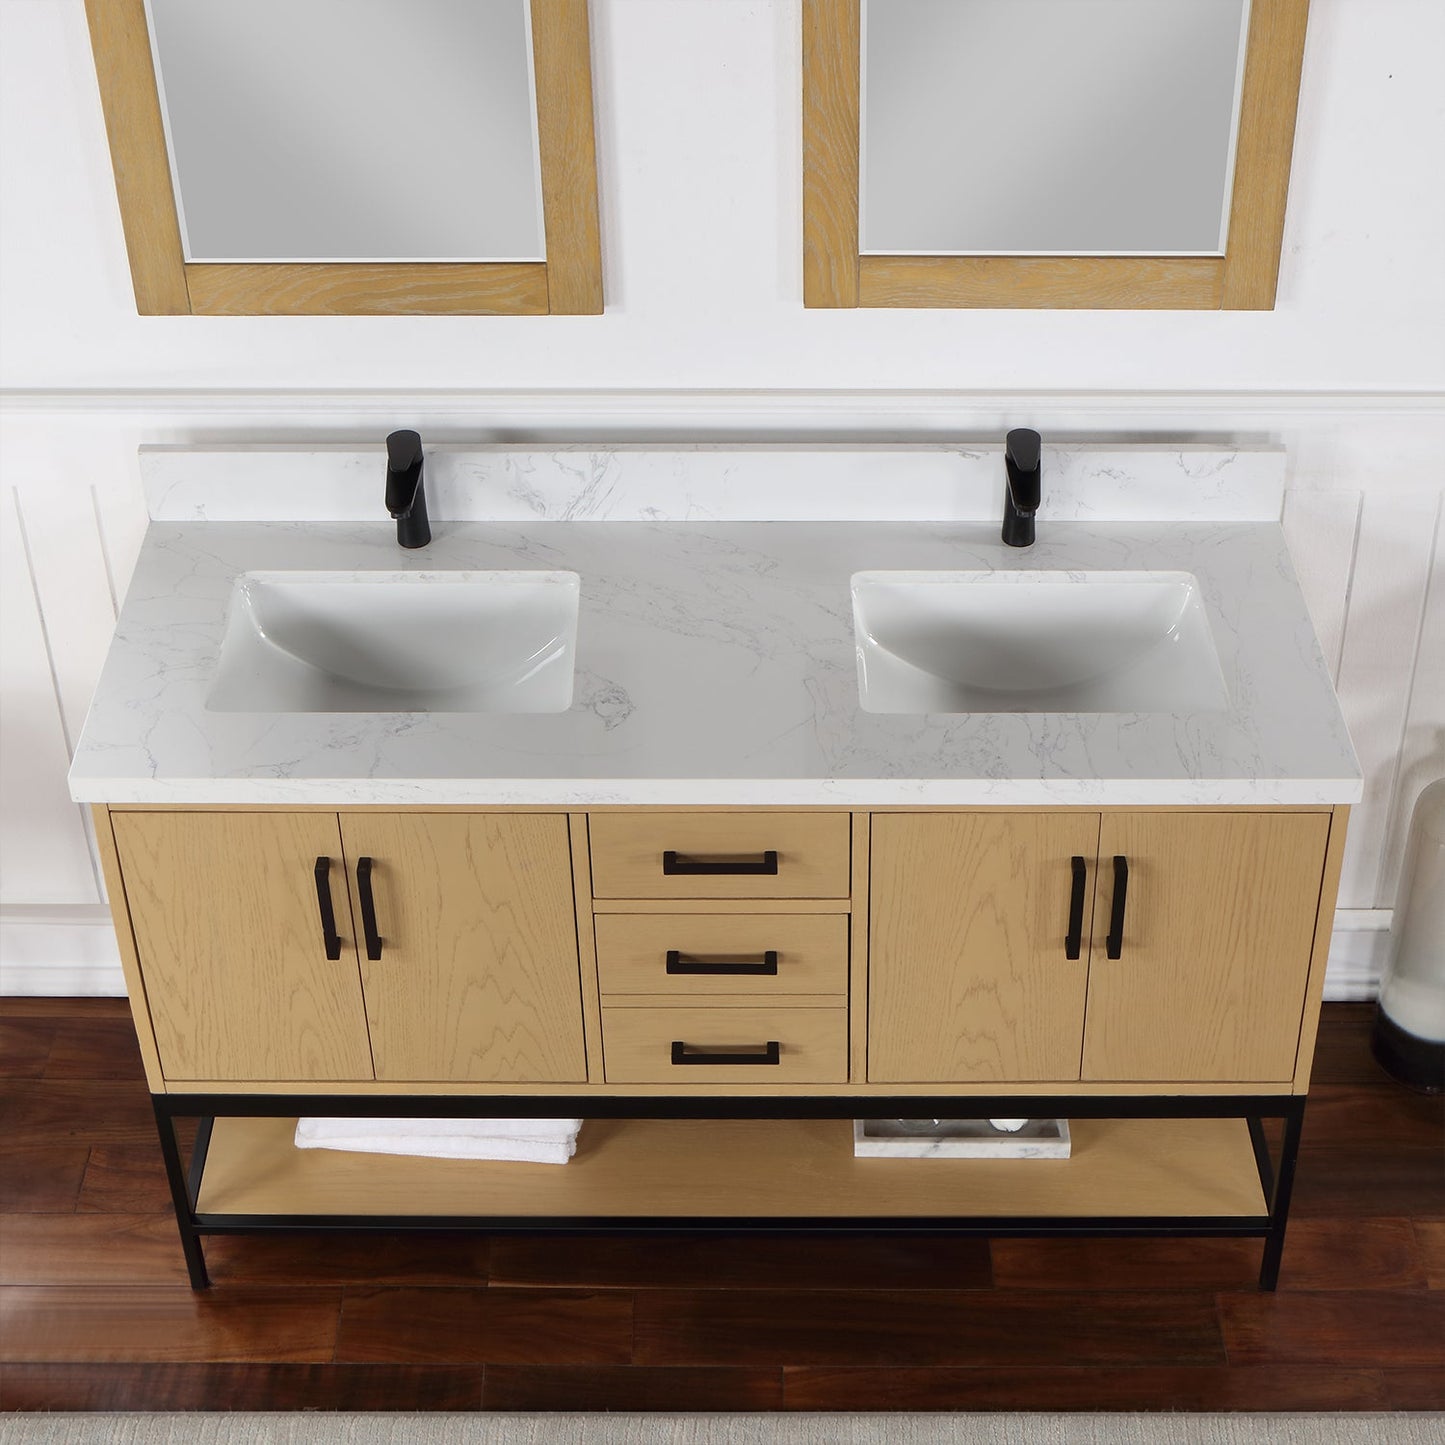 Wildy 60" Double Bathroom Vanity Set in Washed Oak with Grain White Composite Stone Countertop with Mirror